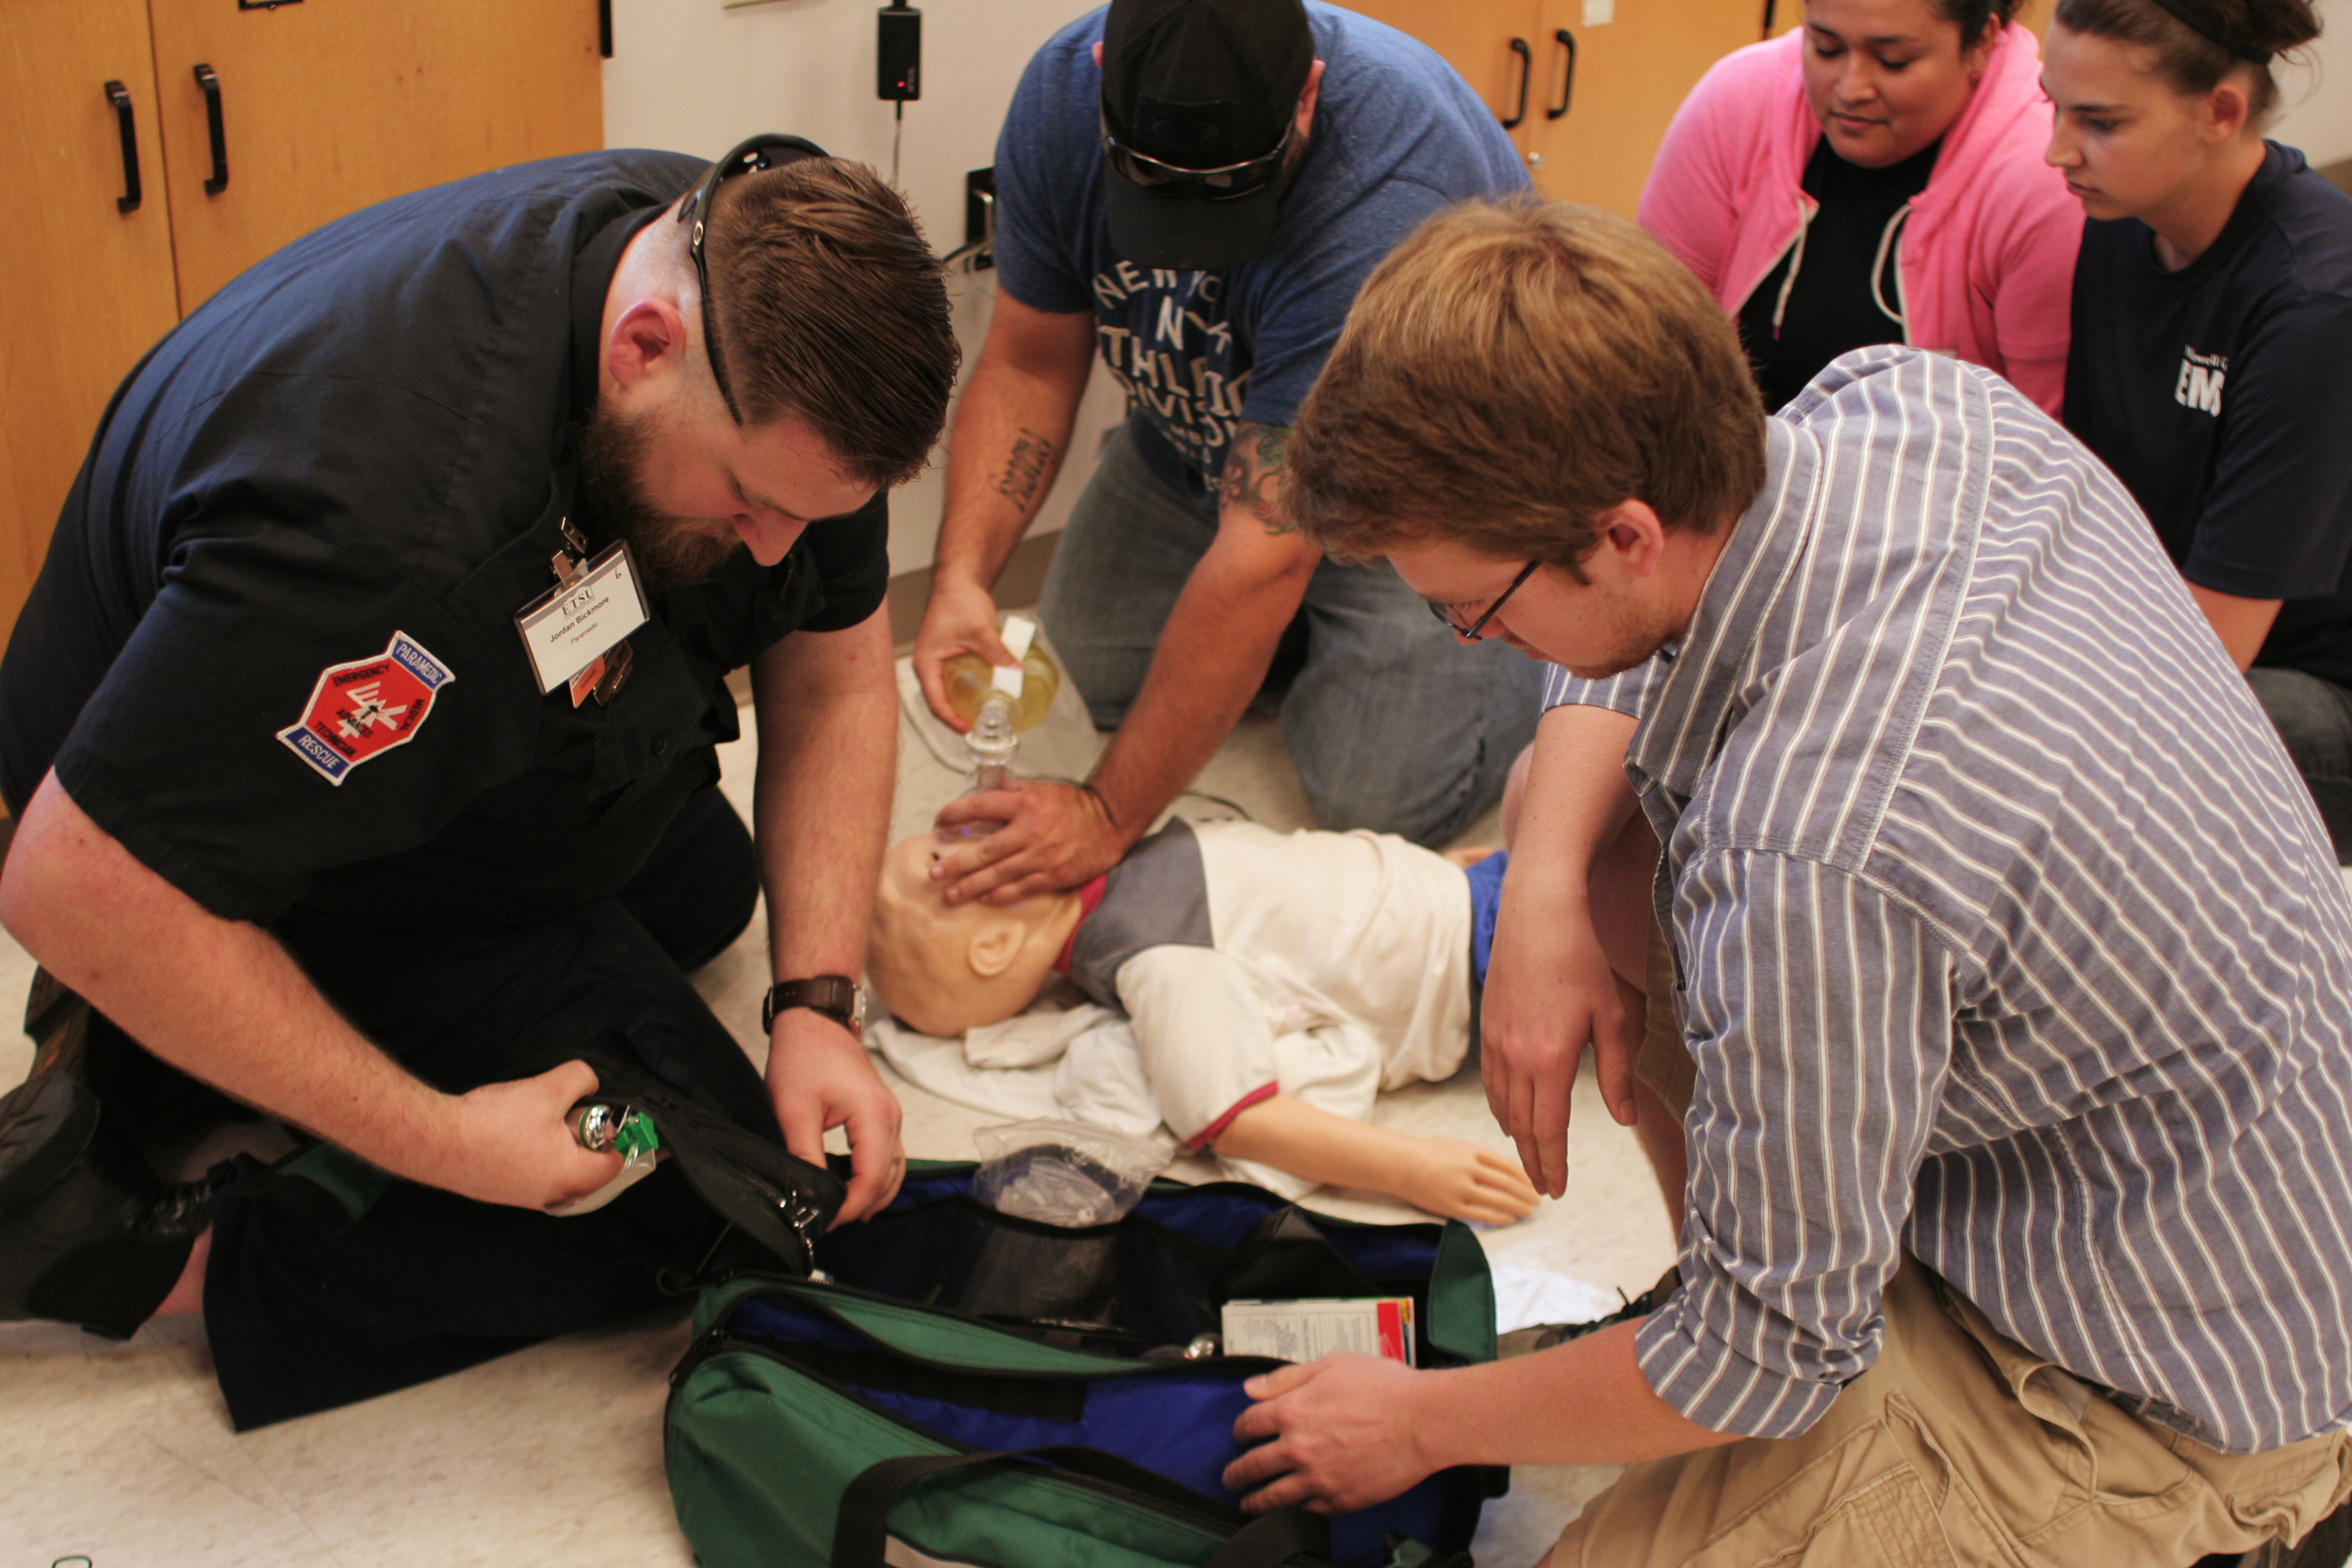   Conference attendee work together in teams in Quillen's state-of-the-art simulation lab.  